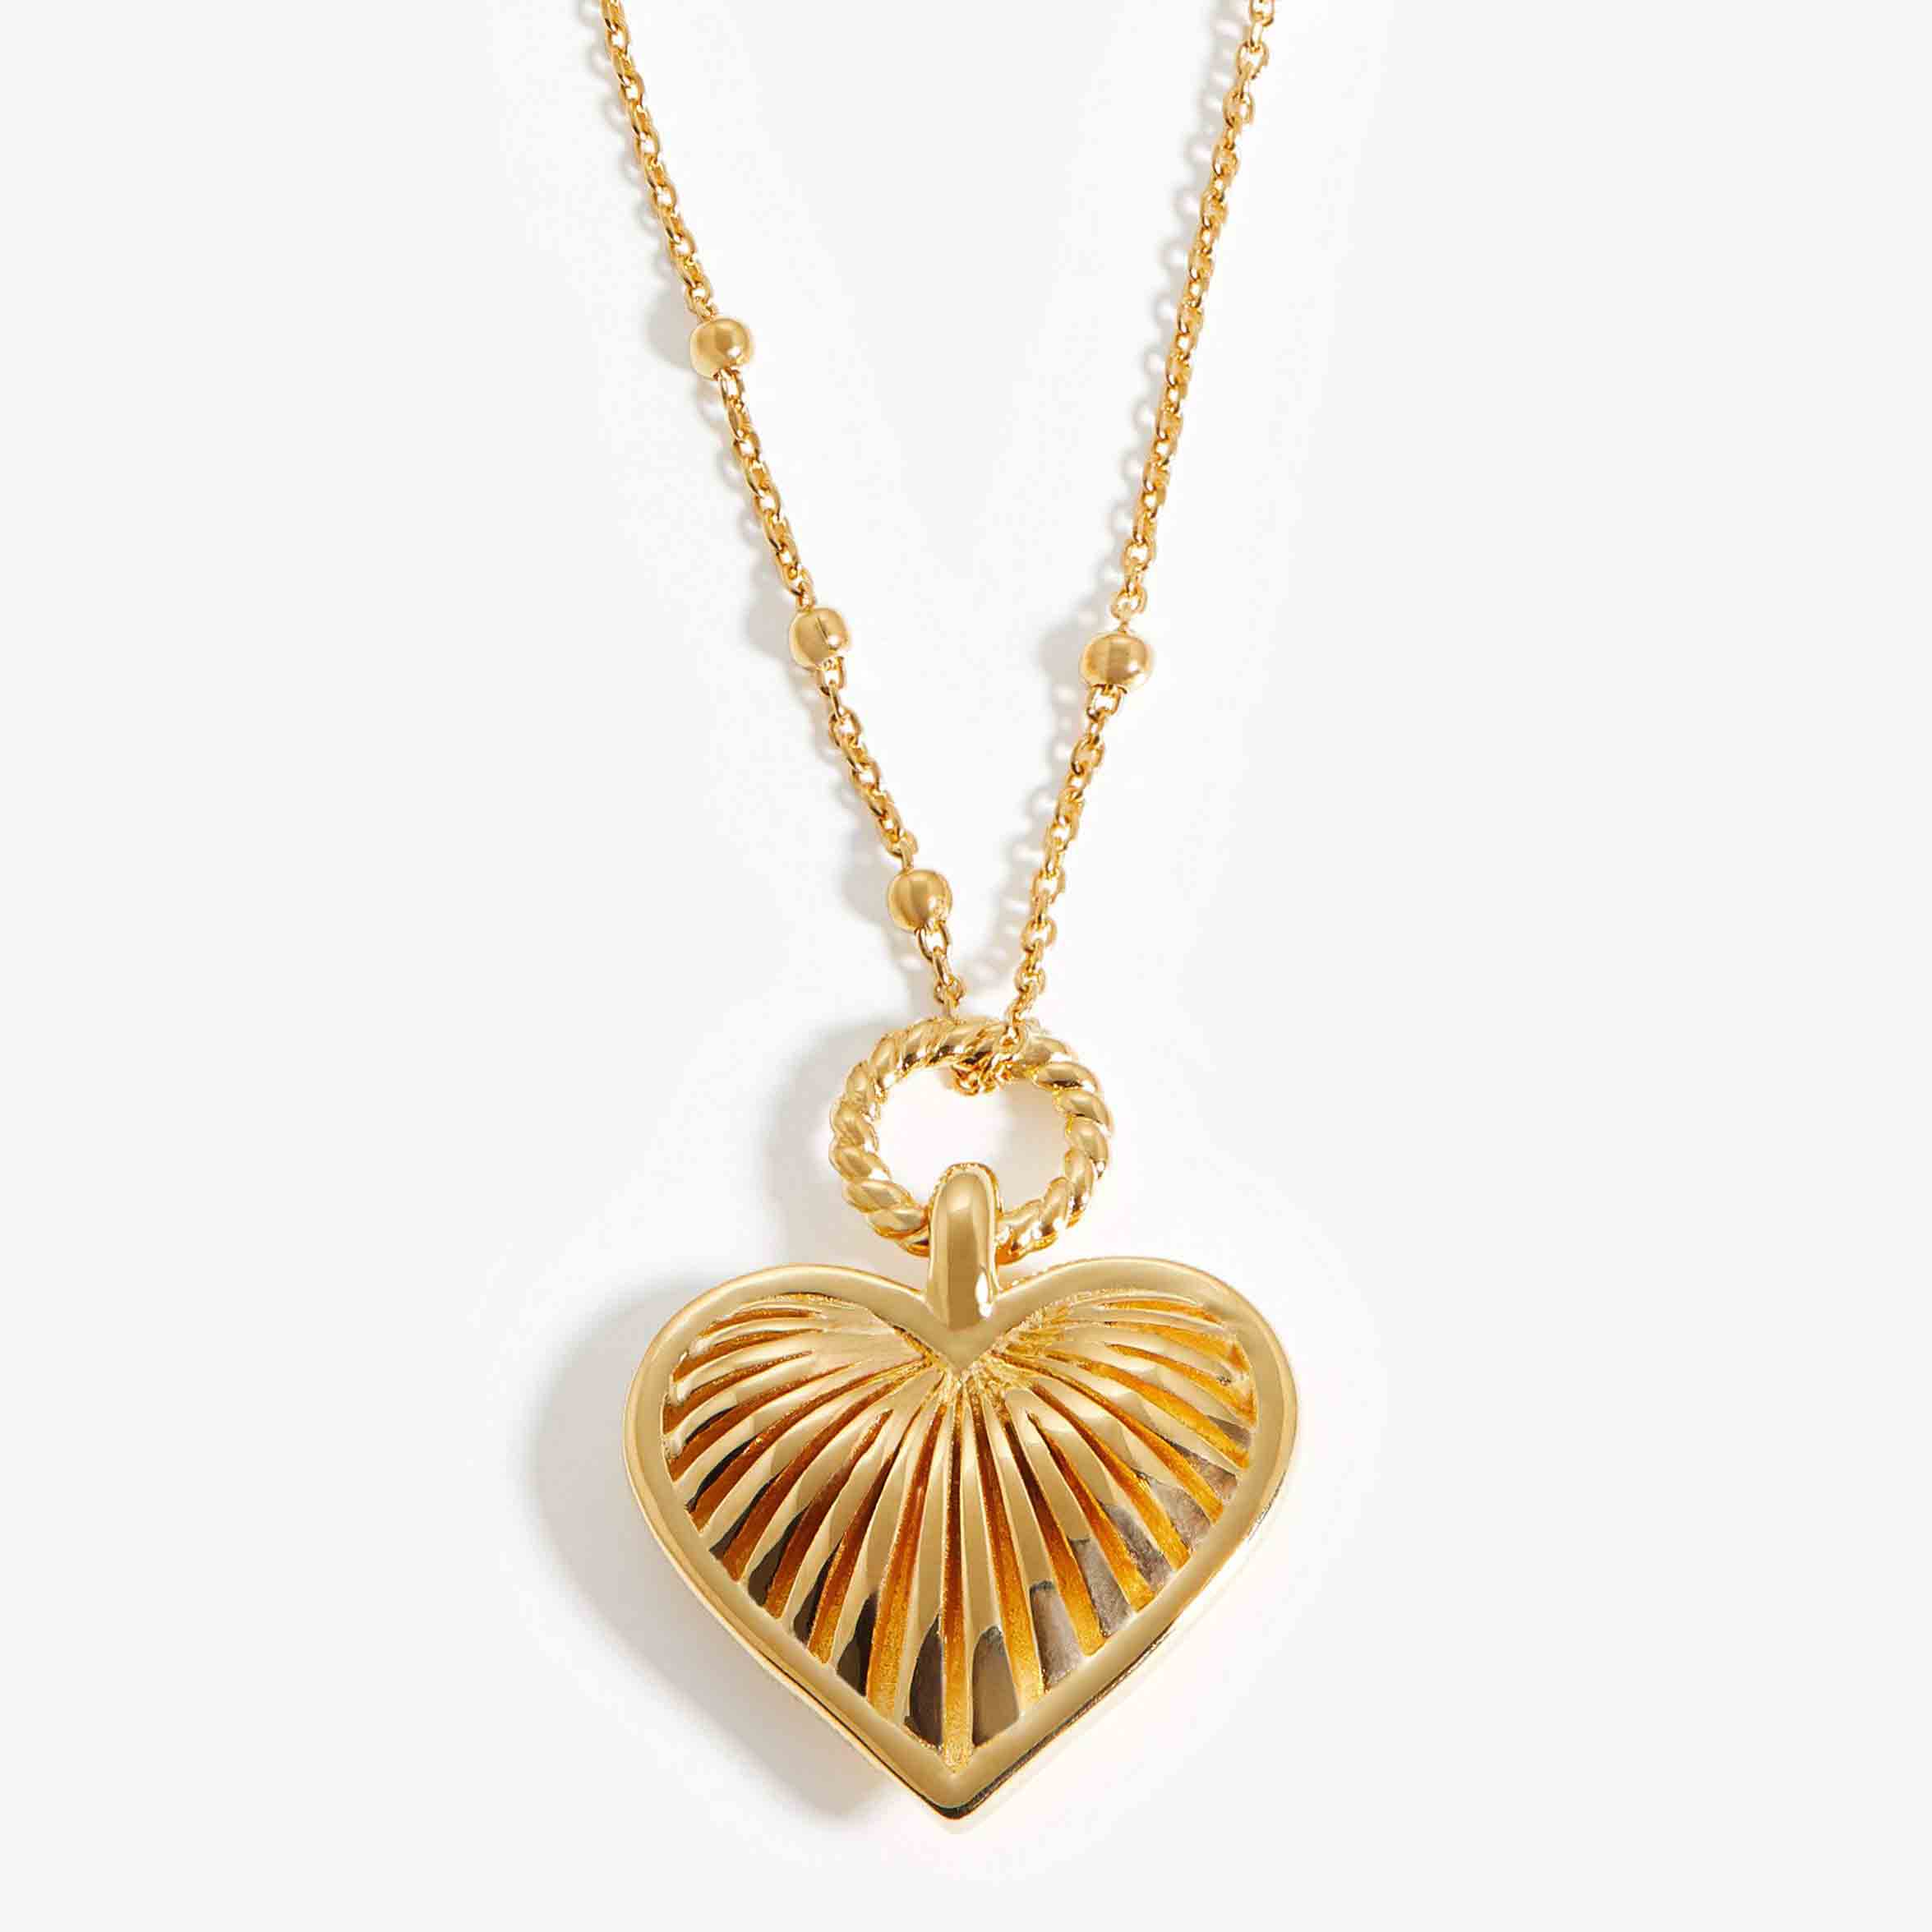 gold vermeil jewelry manufacturer make heart charm necklace in 18k gold plated silver